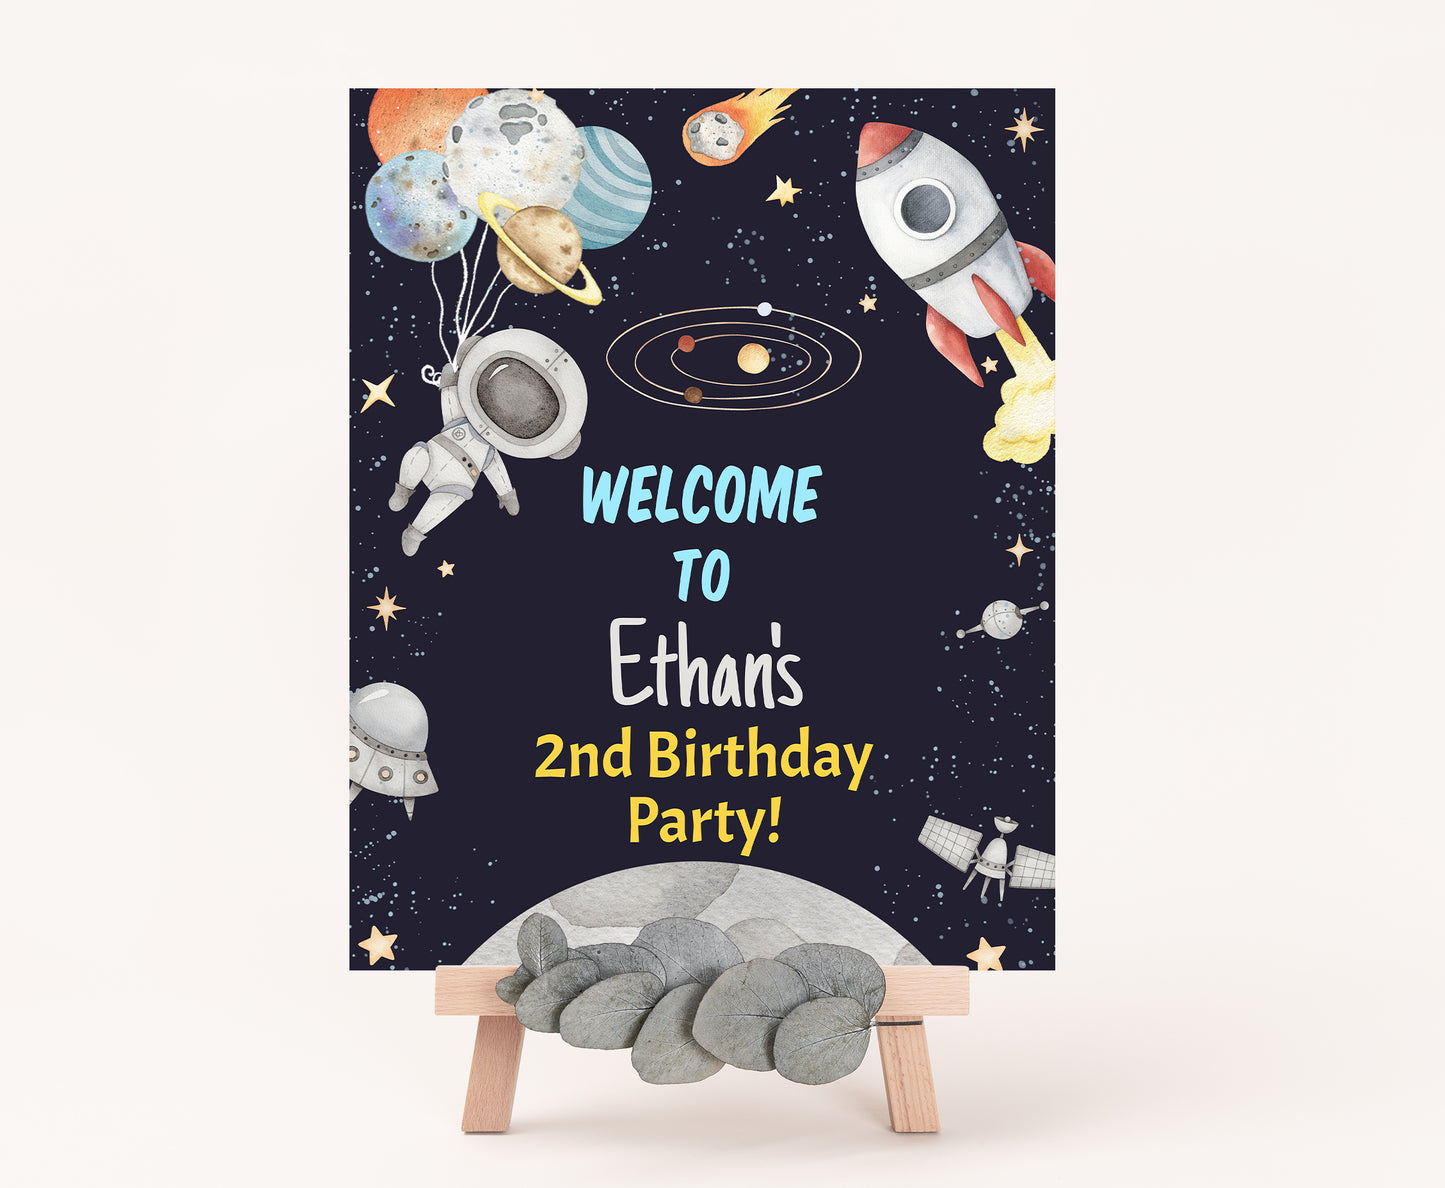 Art Party Art Party Signs Art Party Favors Art Party -   Art party  invitations, Art birthday party, Art birthday invitations